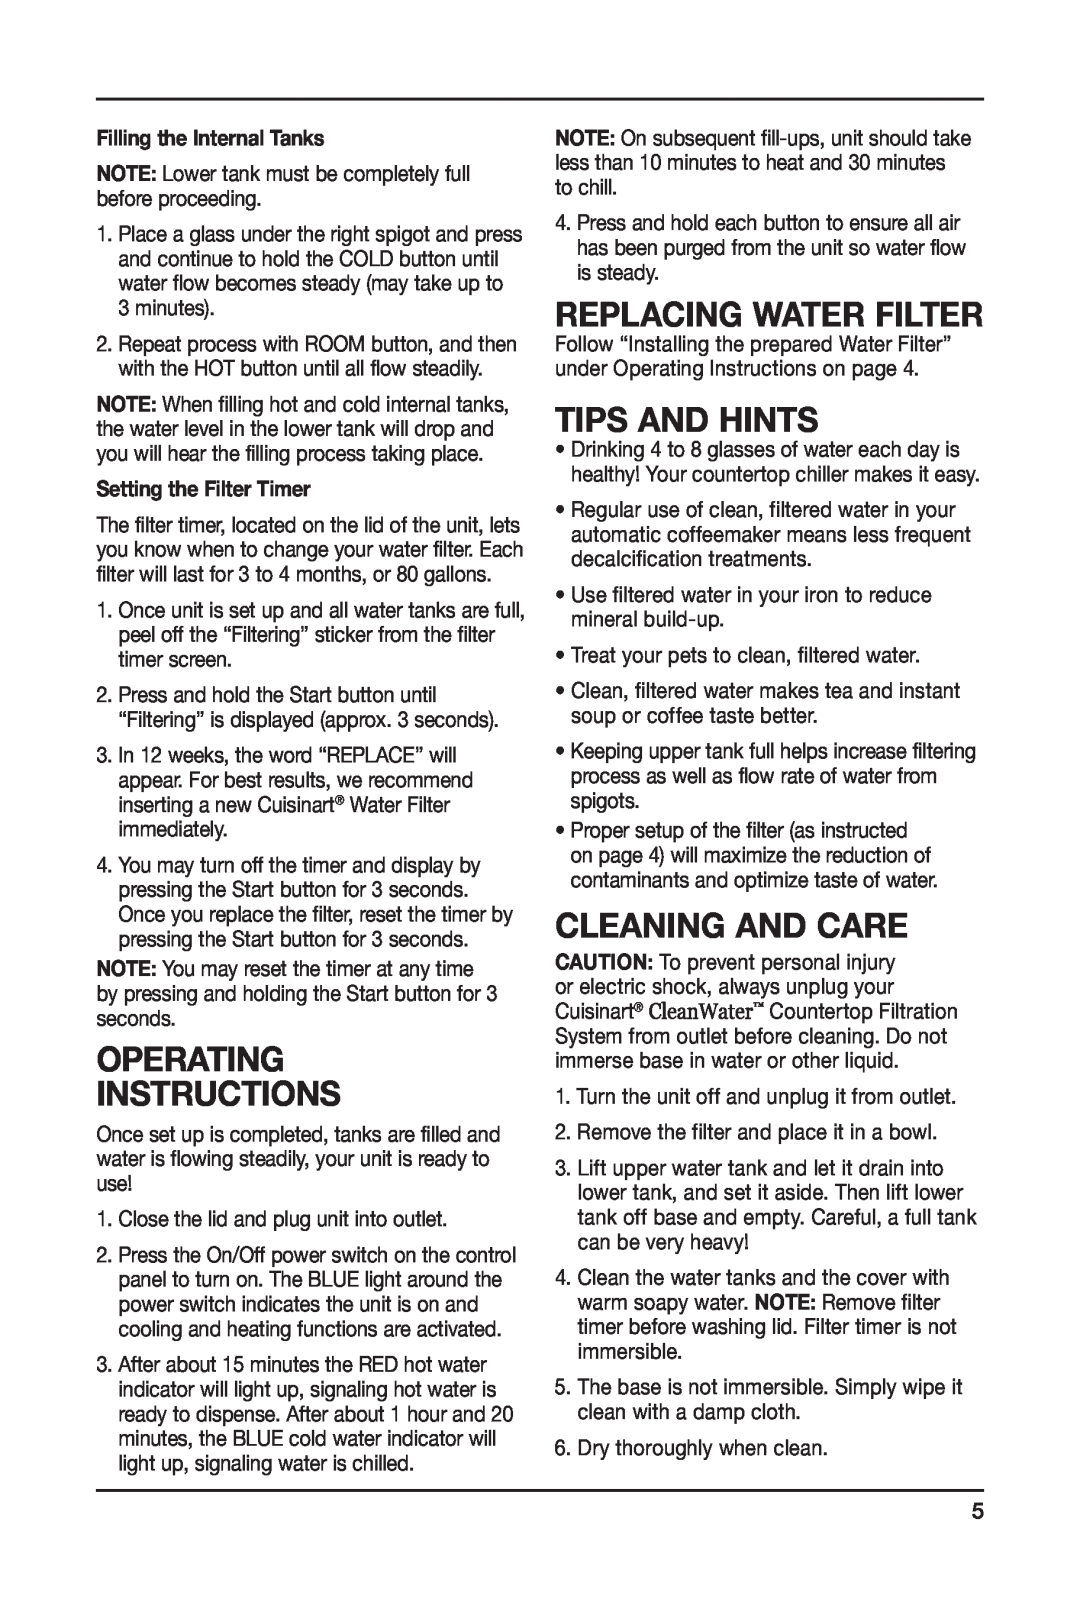 Cuisinart WCH-950 manual Operating Instructions, Tips And Hints, Cleaning And Care, Replacing Water Filter 